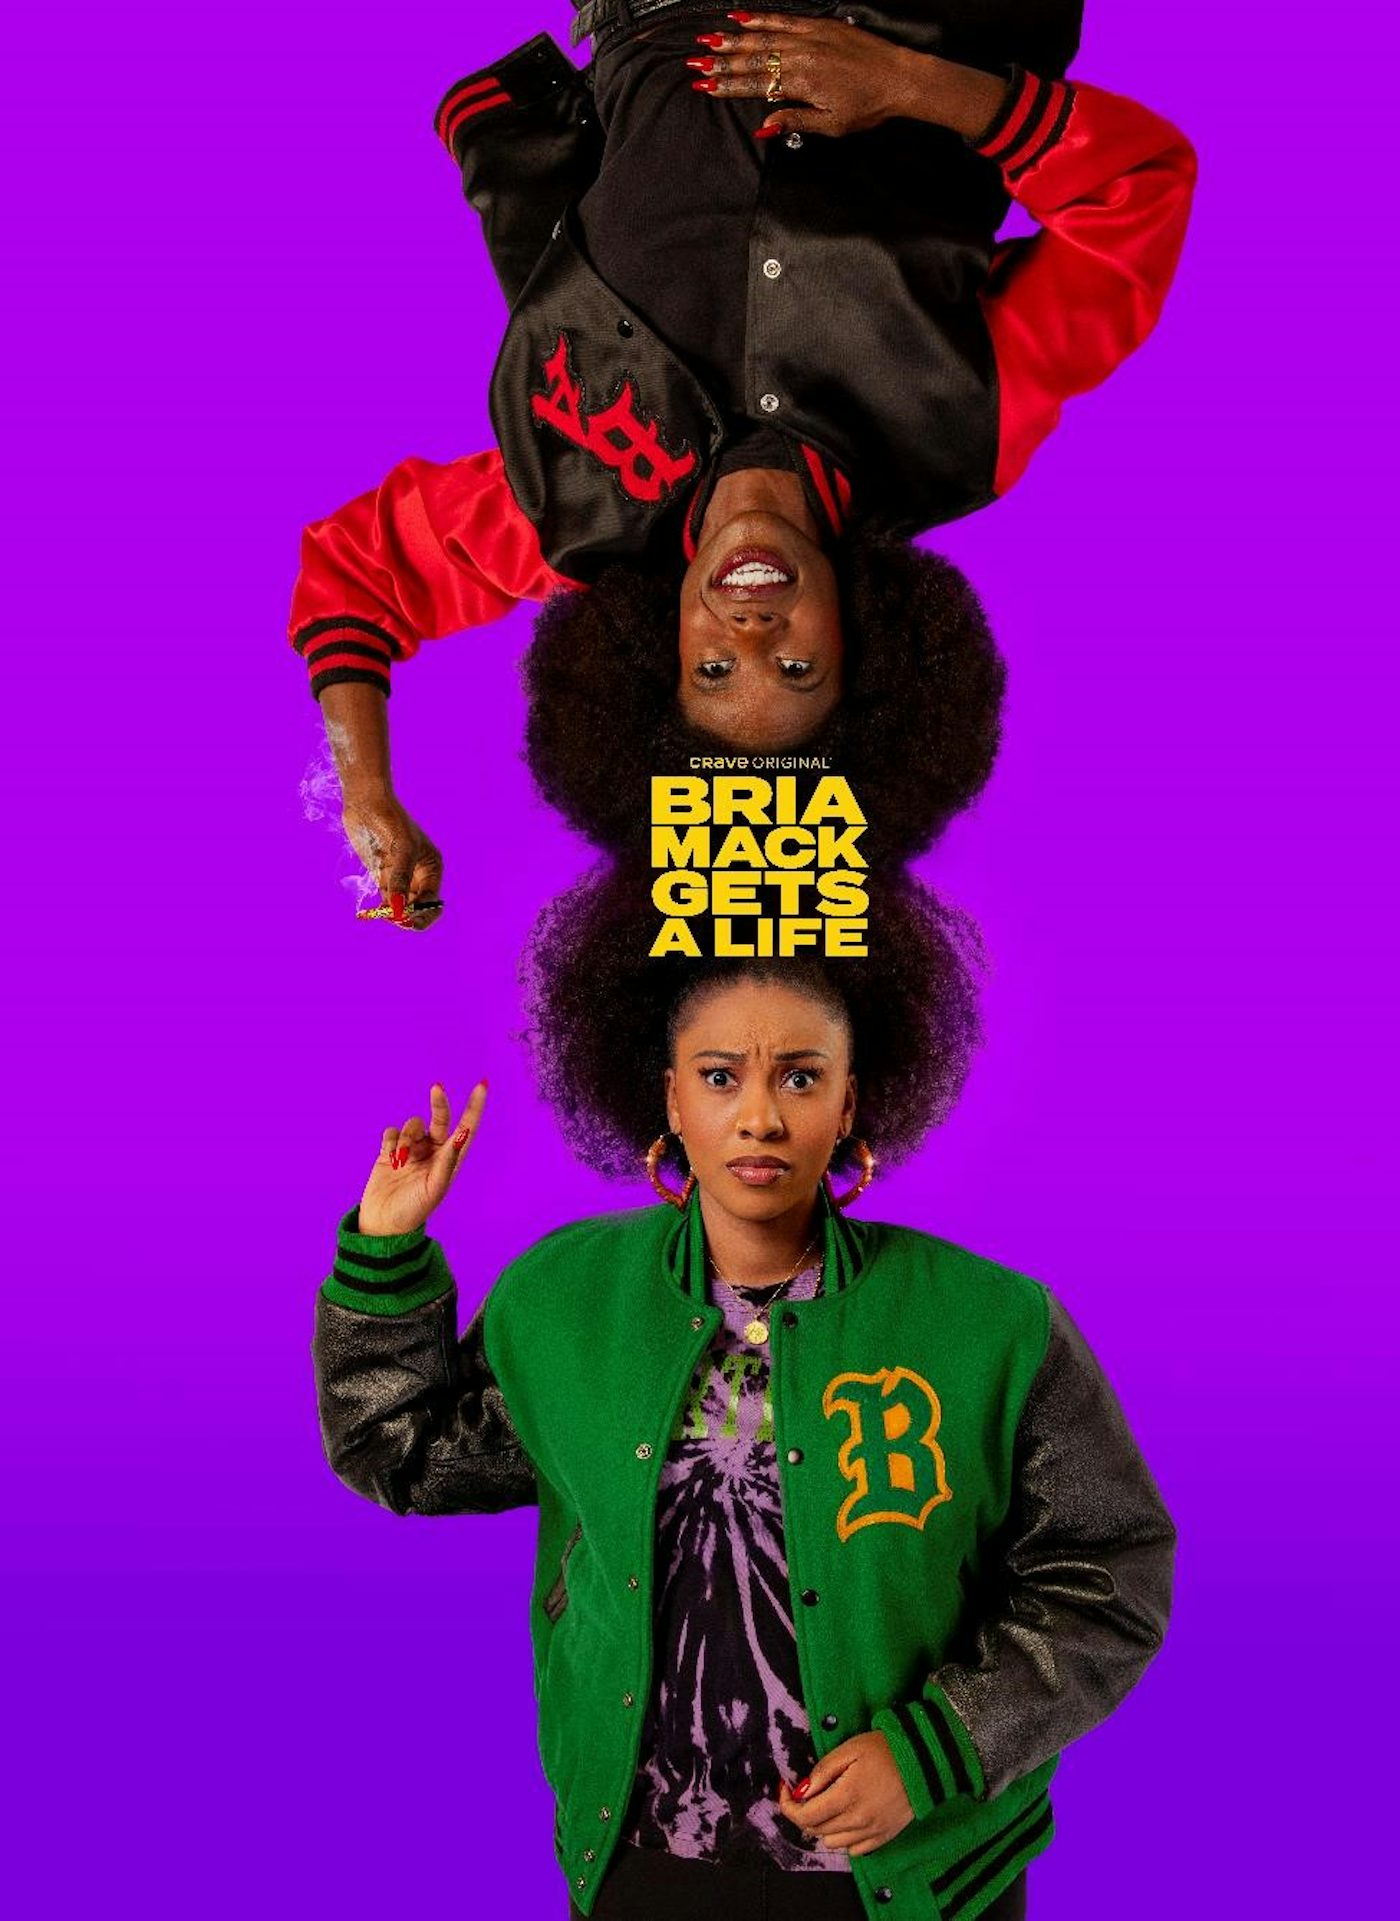 Image for the Fantastical New Crave Original Comedy Series, BRIA MACK GETS A LIFE from Sasha Leigh Henry, Gets a Premiere Date: October 13 press release